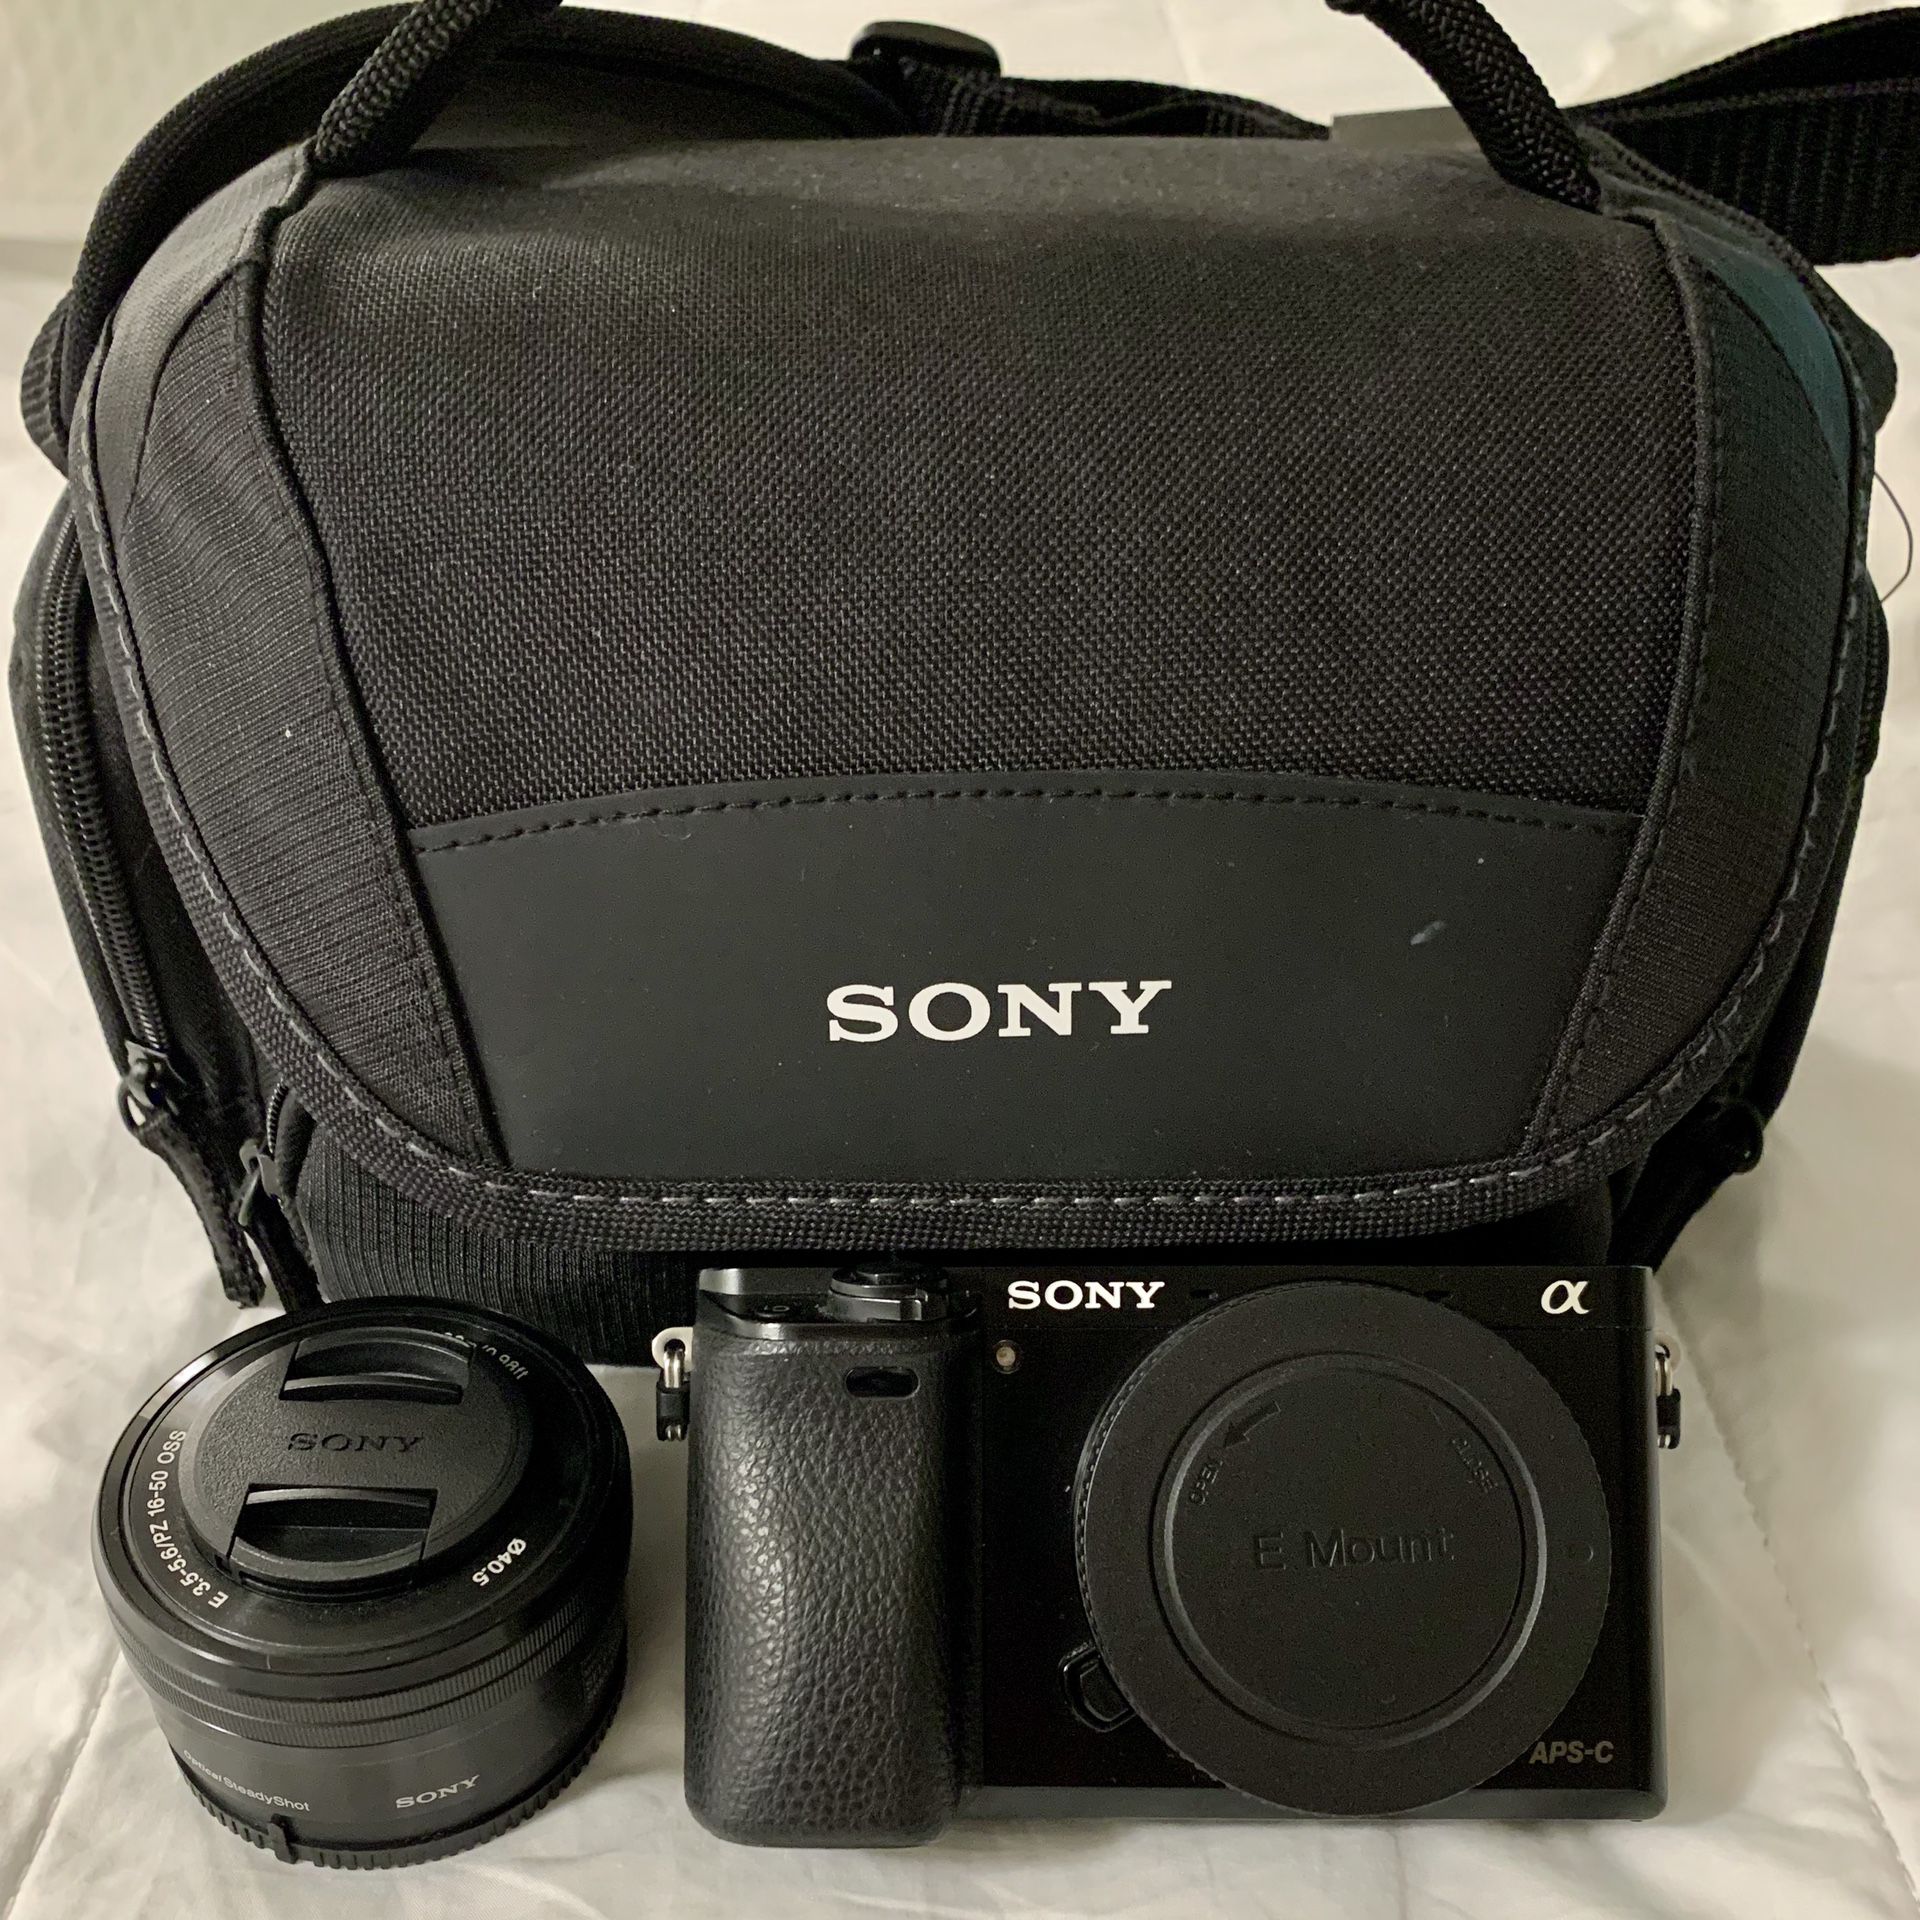 Sony a6000 w/ 15-60mm Kit Lens & Carrying Case